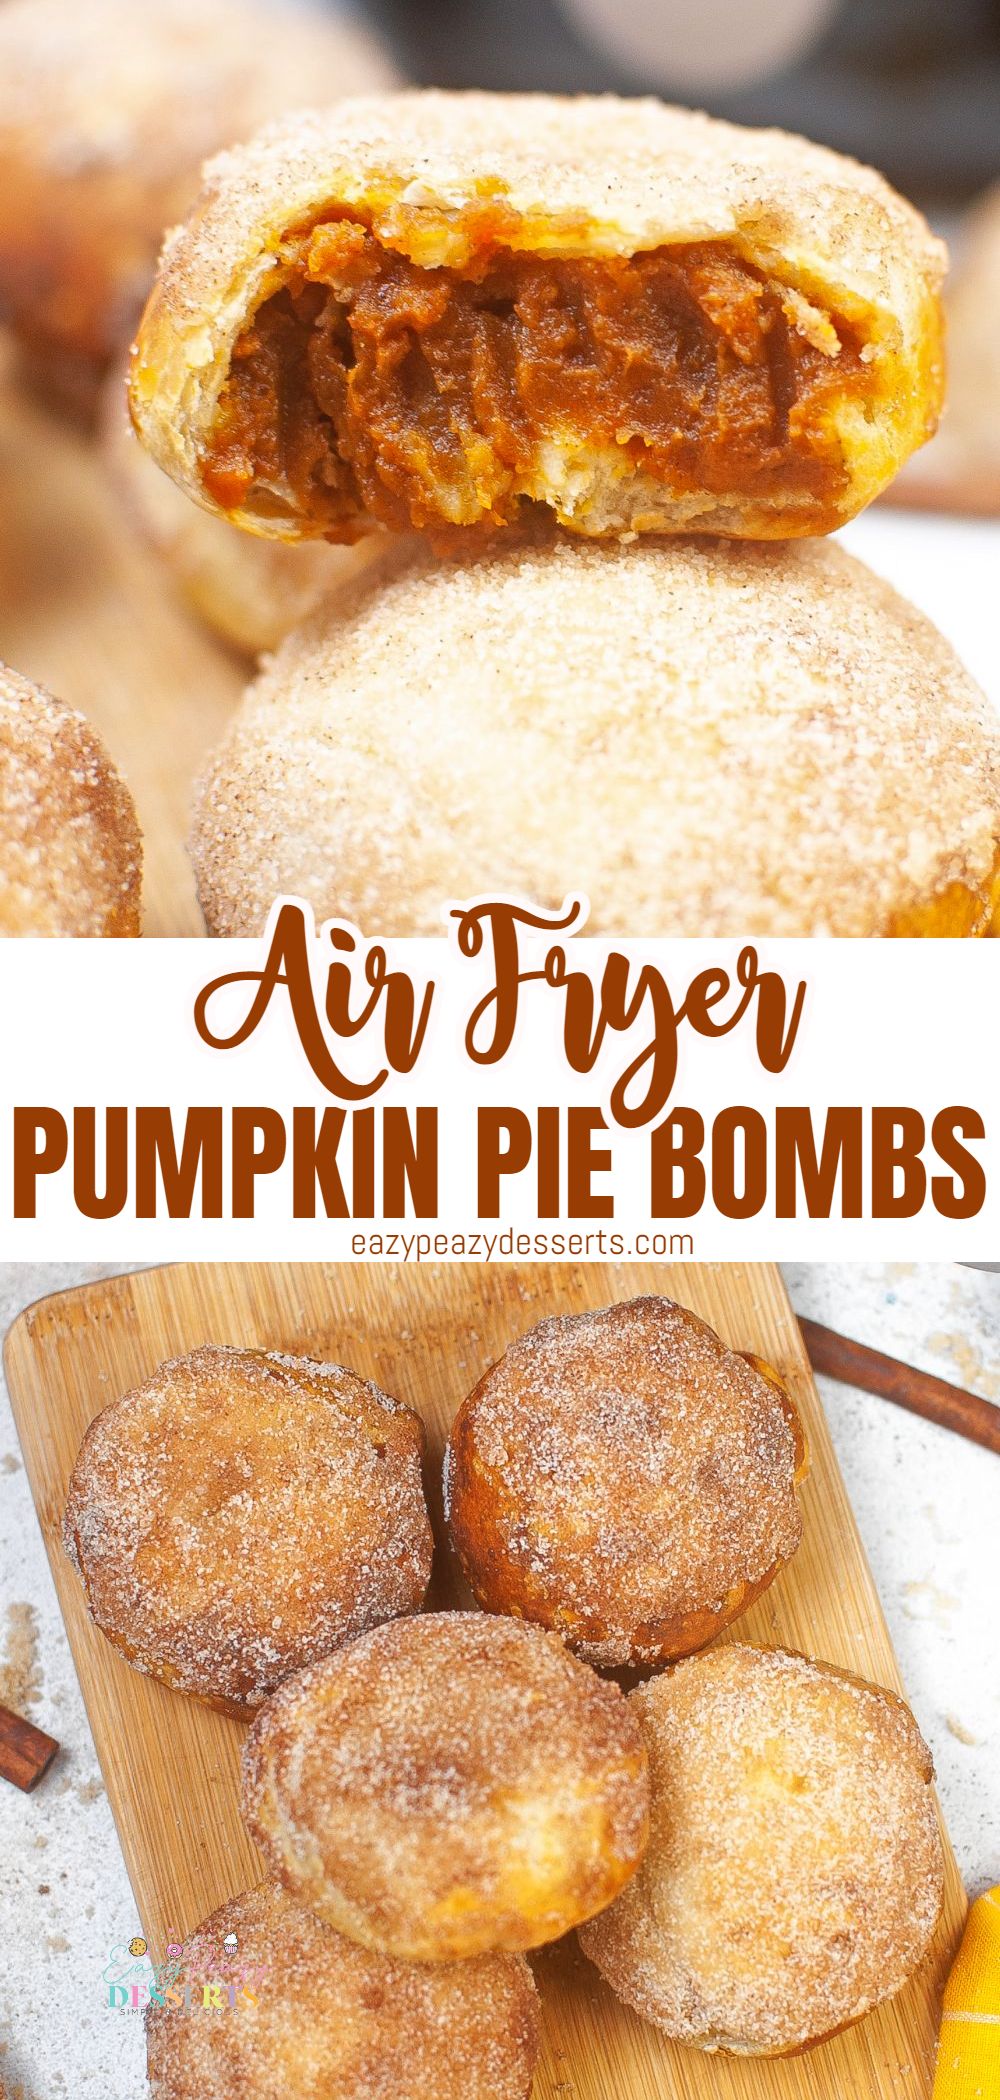 Photo collage of pumpkin pie bombs baked in the air fryer